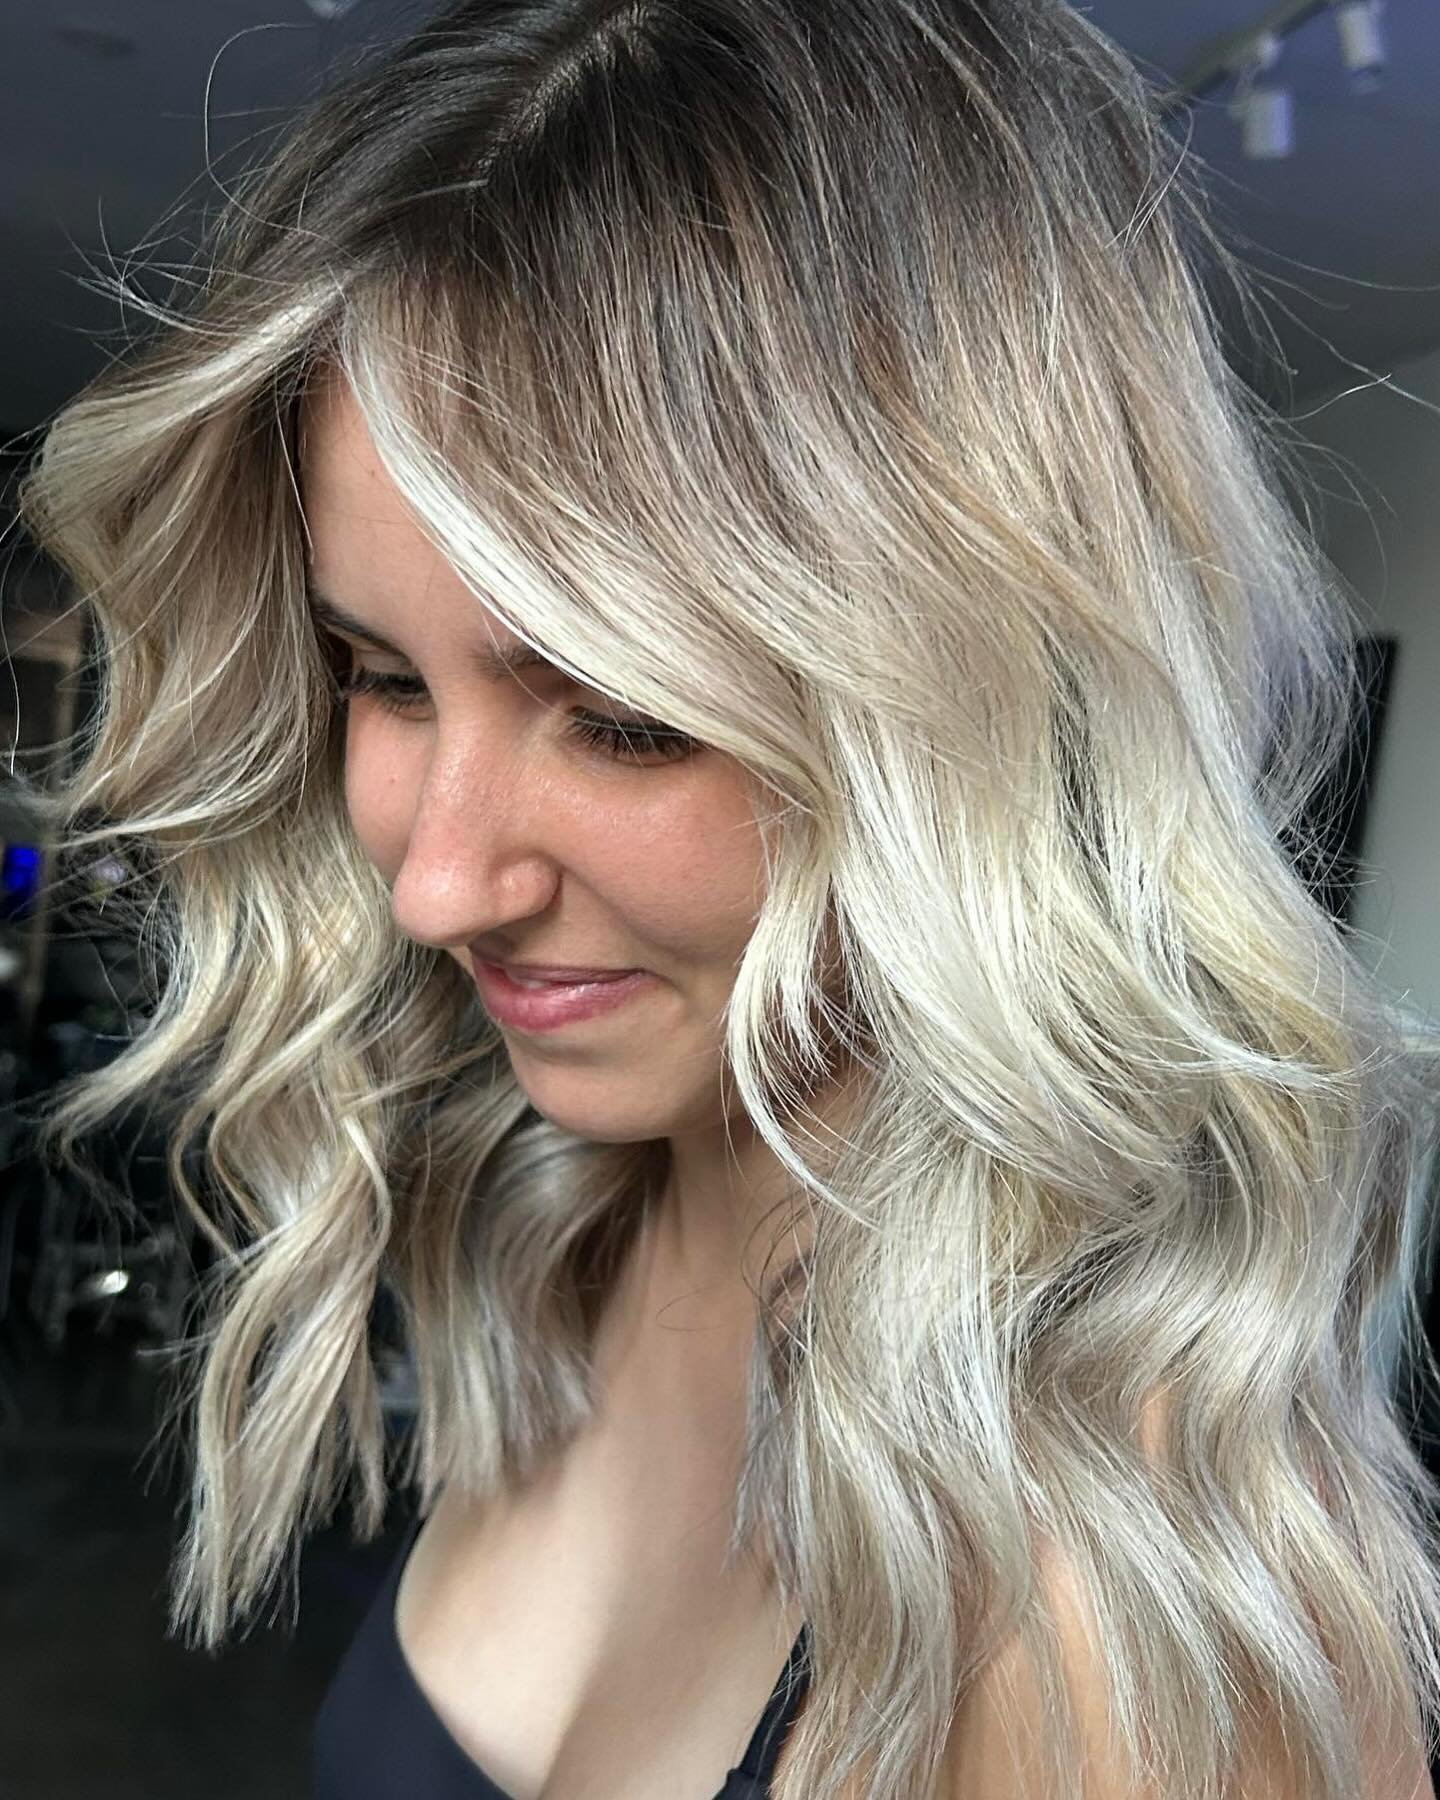 👉🏻 Swipe to see the before! 

Welcome to the bright side Sarah 🌼☀️💛

-Fullhead of Balyage Foils 
-Tip Out Ends 
-Basin Baly
-Gloss
-Wellaplex 
-Cut &amp; Styled

The total BoBlonde Transformation Package! 

Magic created by @hairbyangel_boblonde 